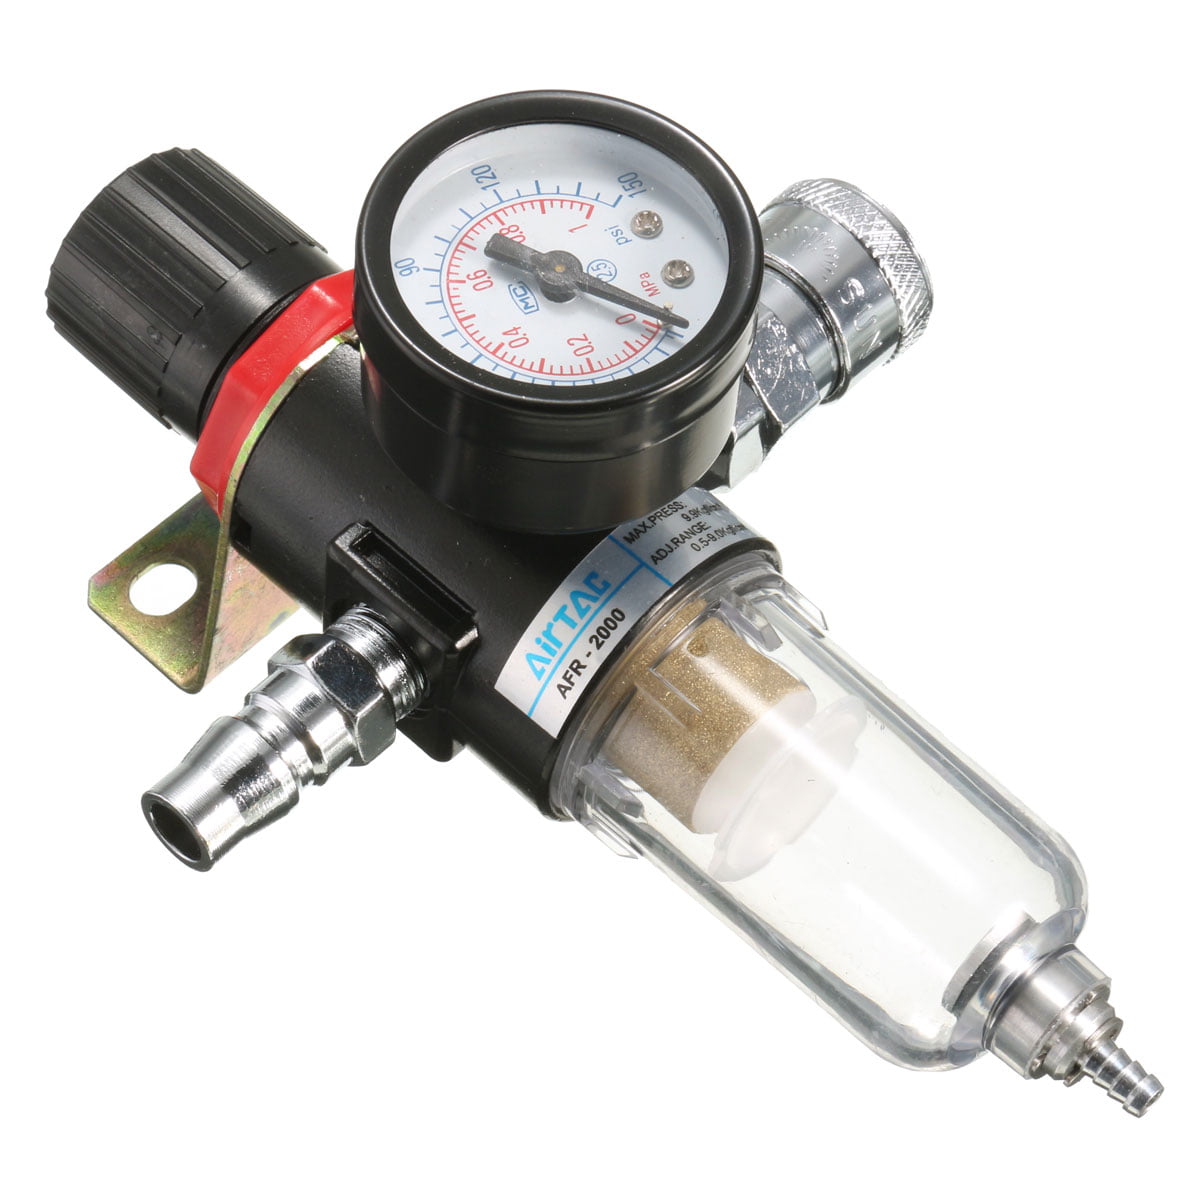 Air Compressor Water Filter With Regulator Water Trap 1/4" NPT Air Tool Cleaning 